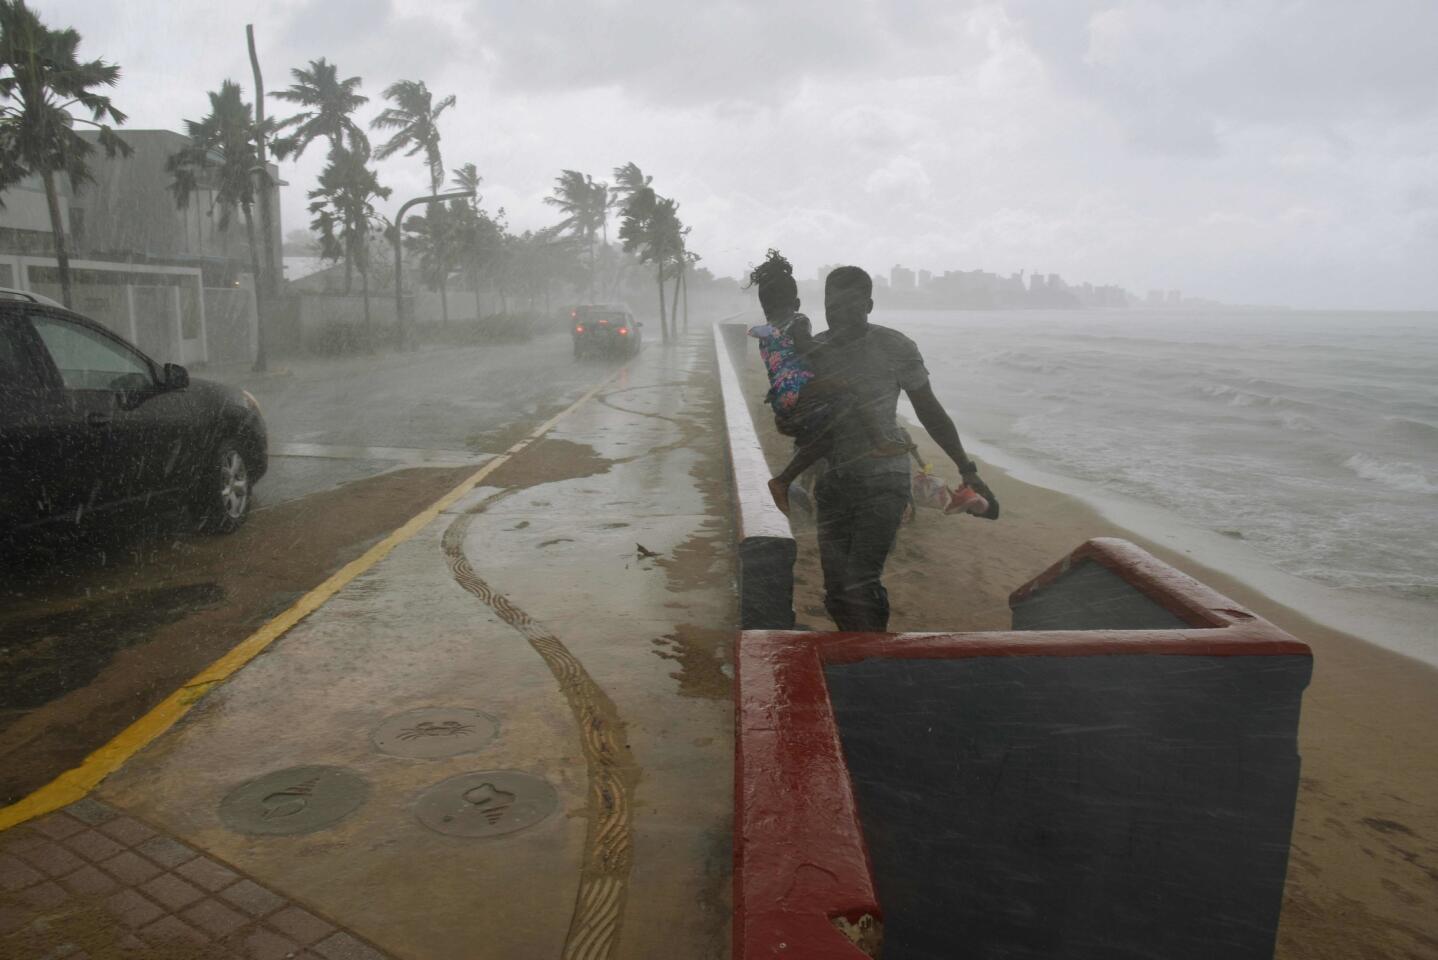 A man and his daughter flee from the rain on a San Juan beach before Hurricane Maria's arrival.